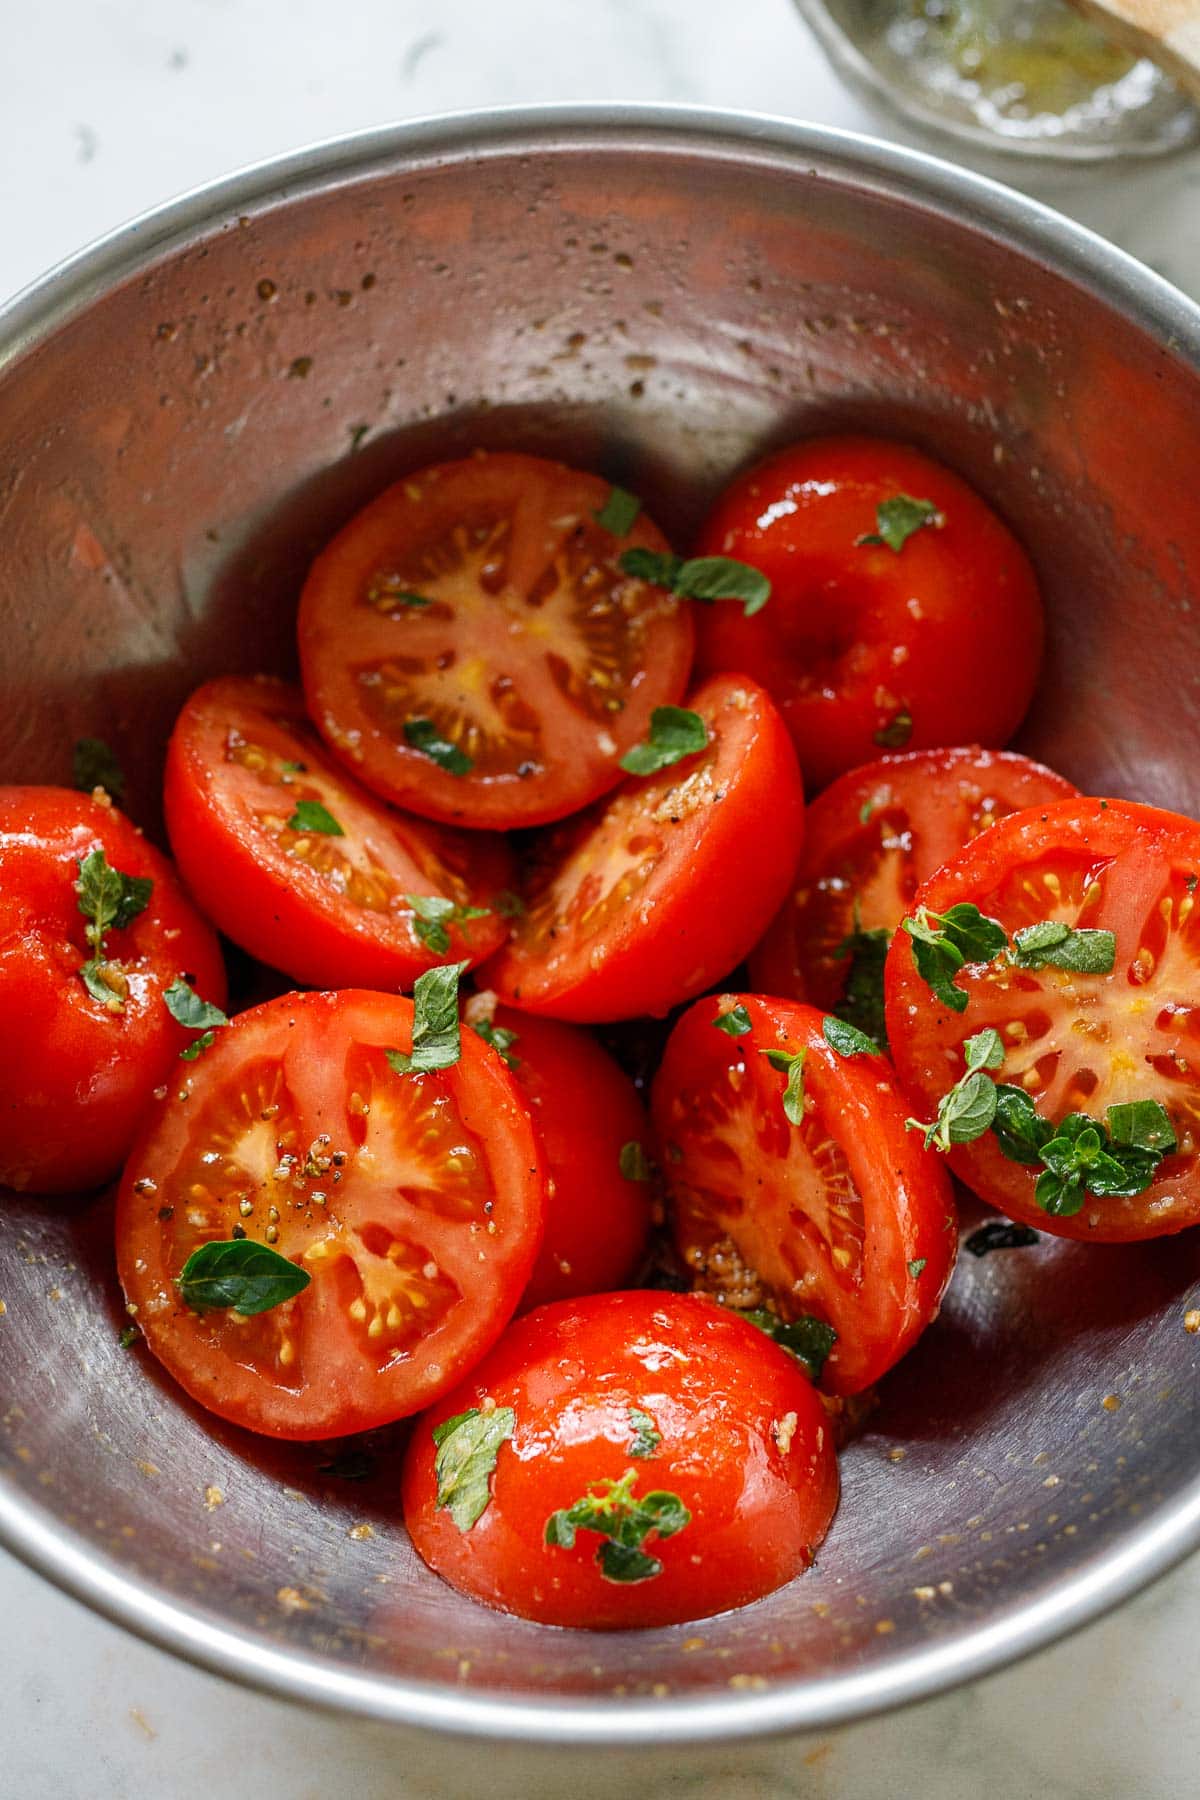 Tossing the halved tomatoes with the marinade in a bowl. 